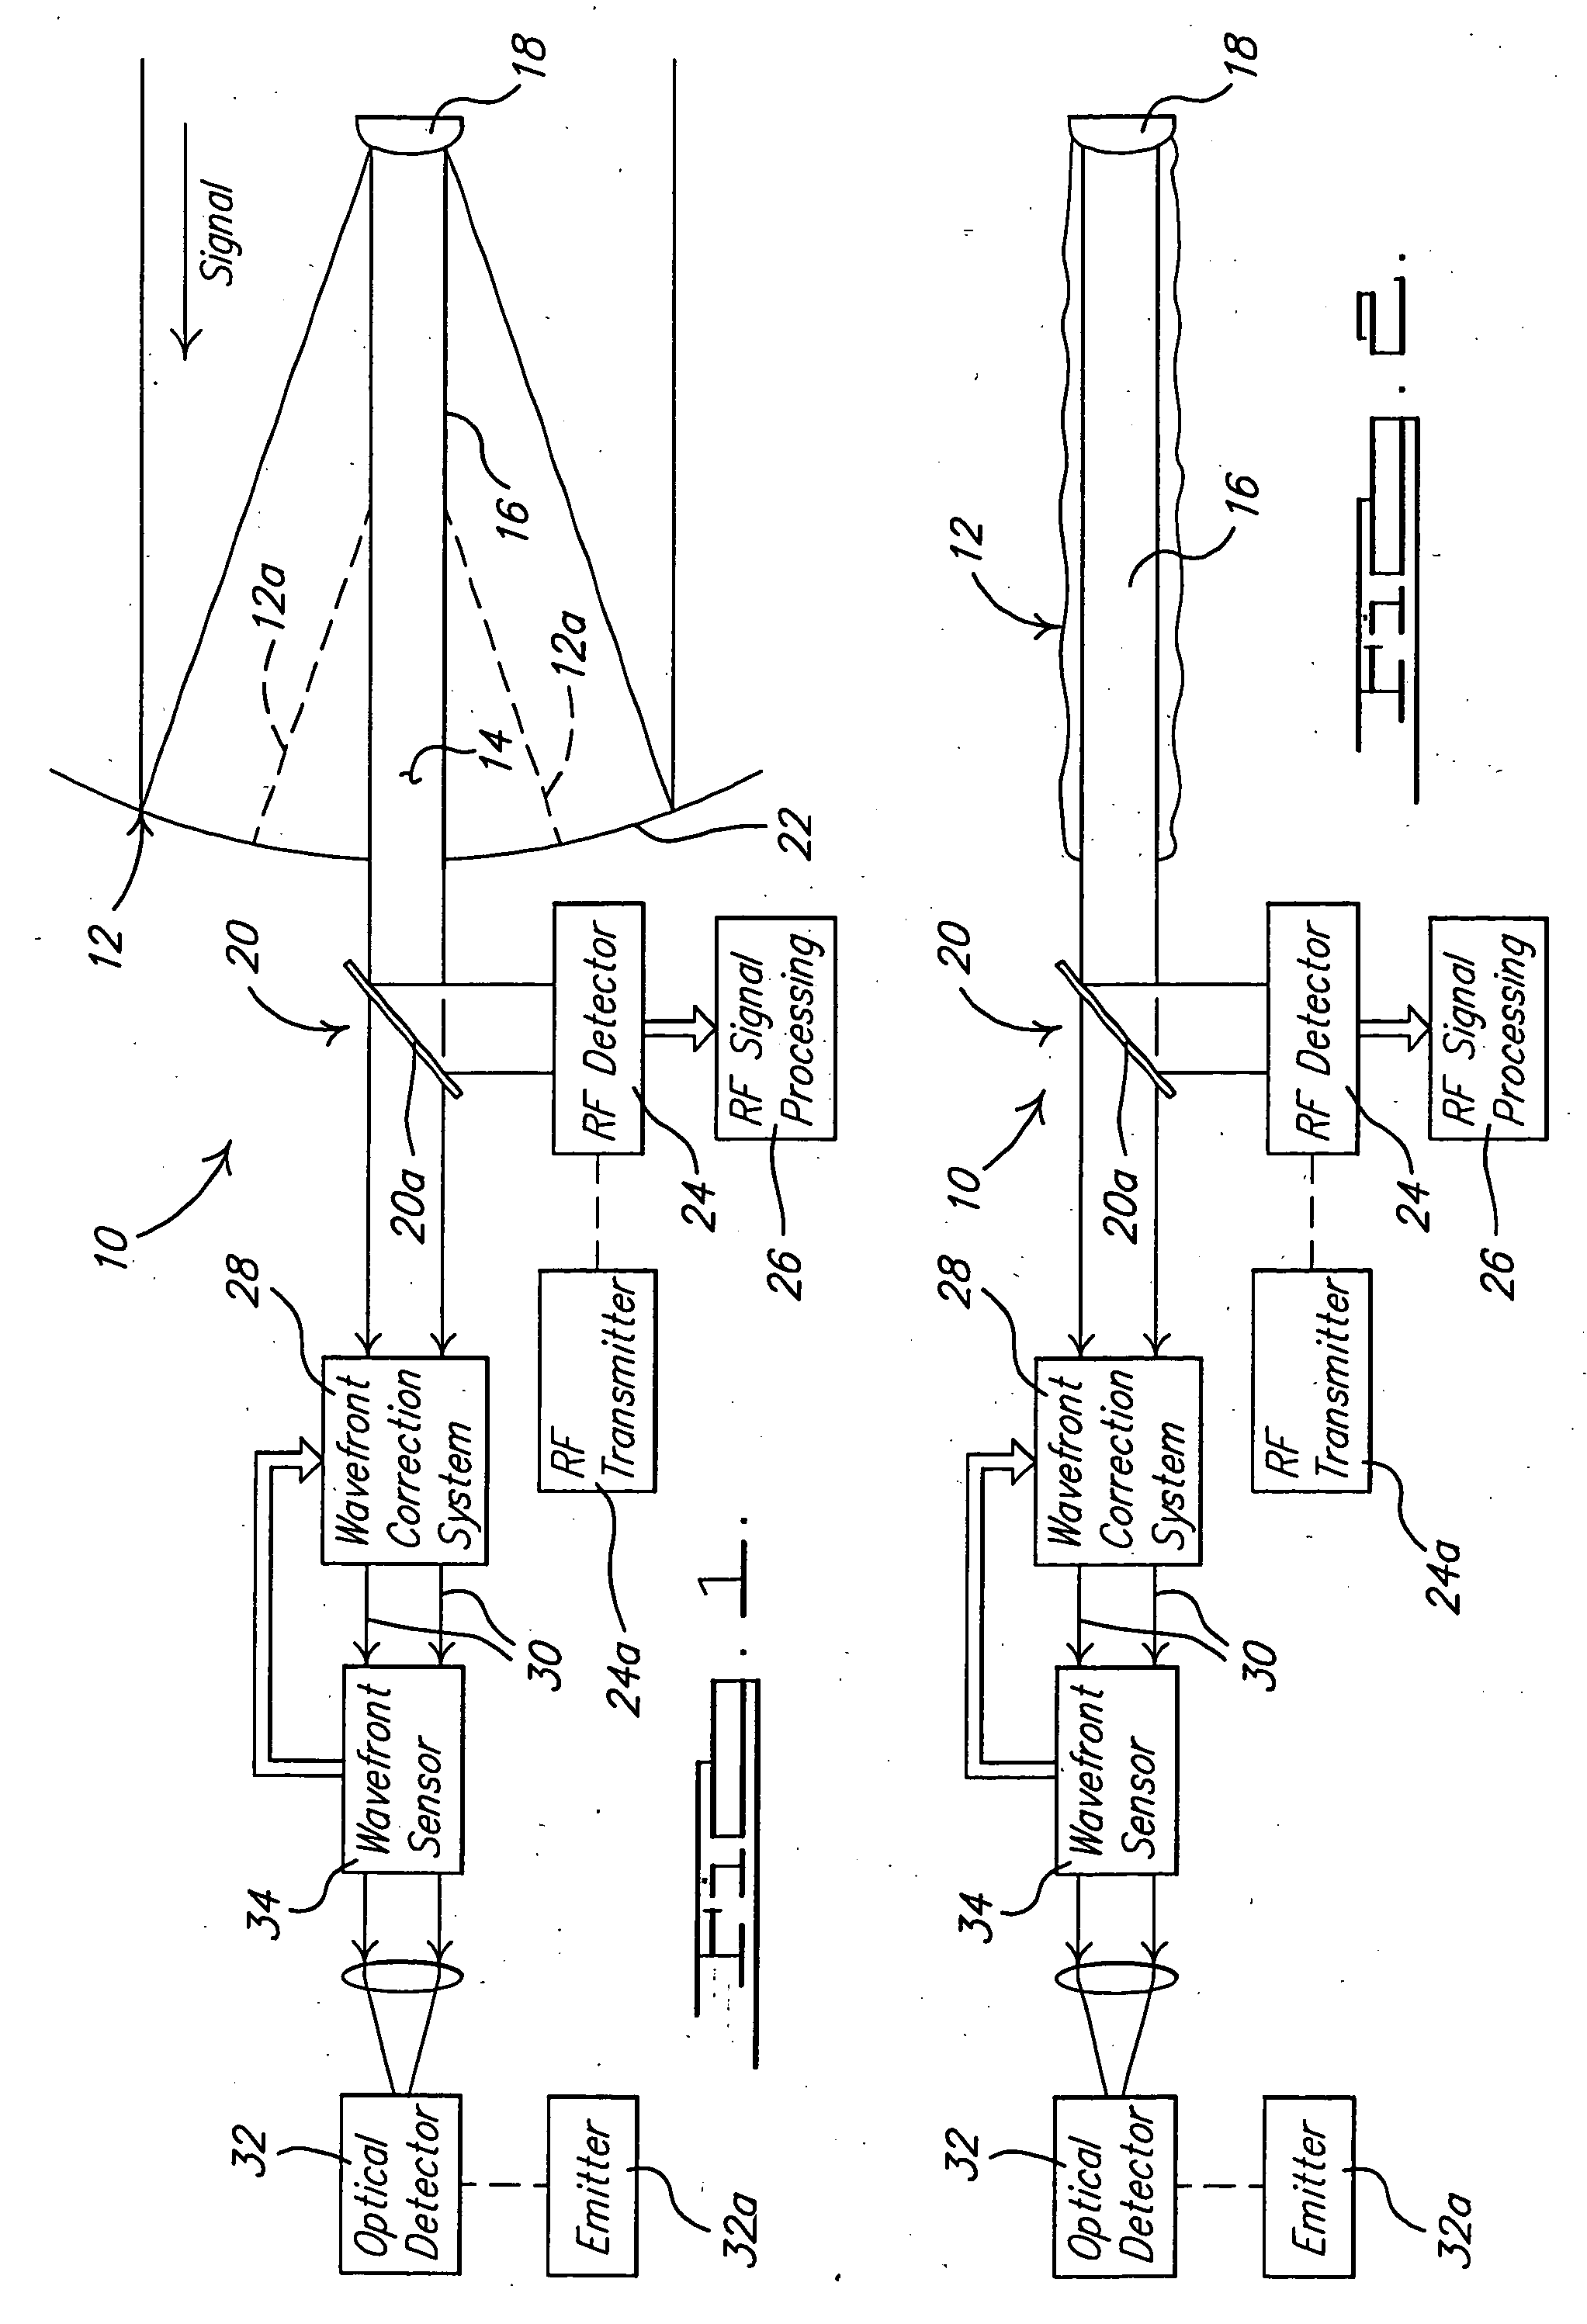 Hybrid RF/optical communication system with deployable optics and atmosphere compensation system and method